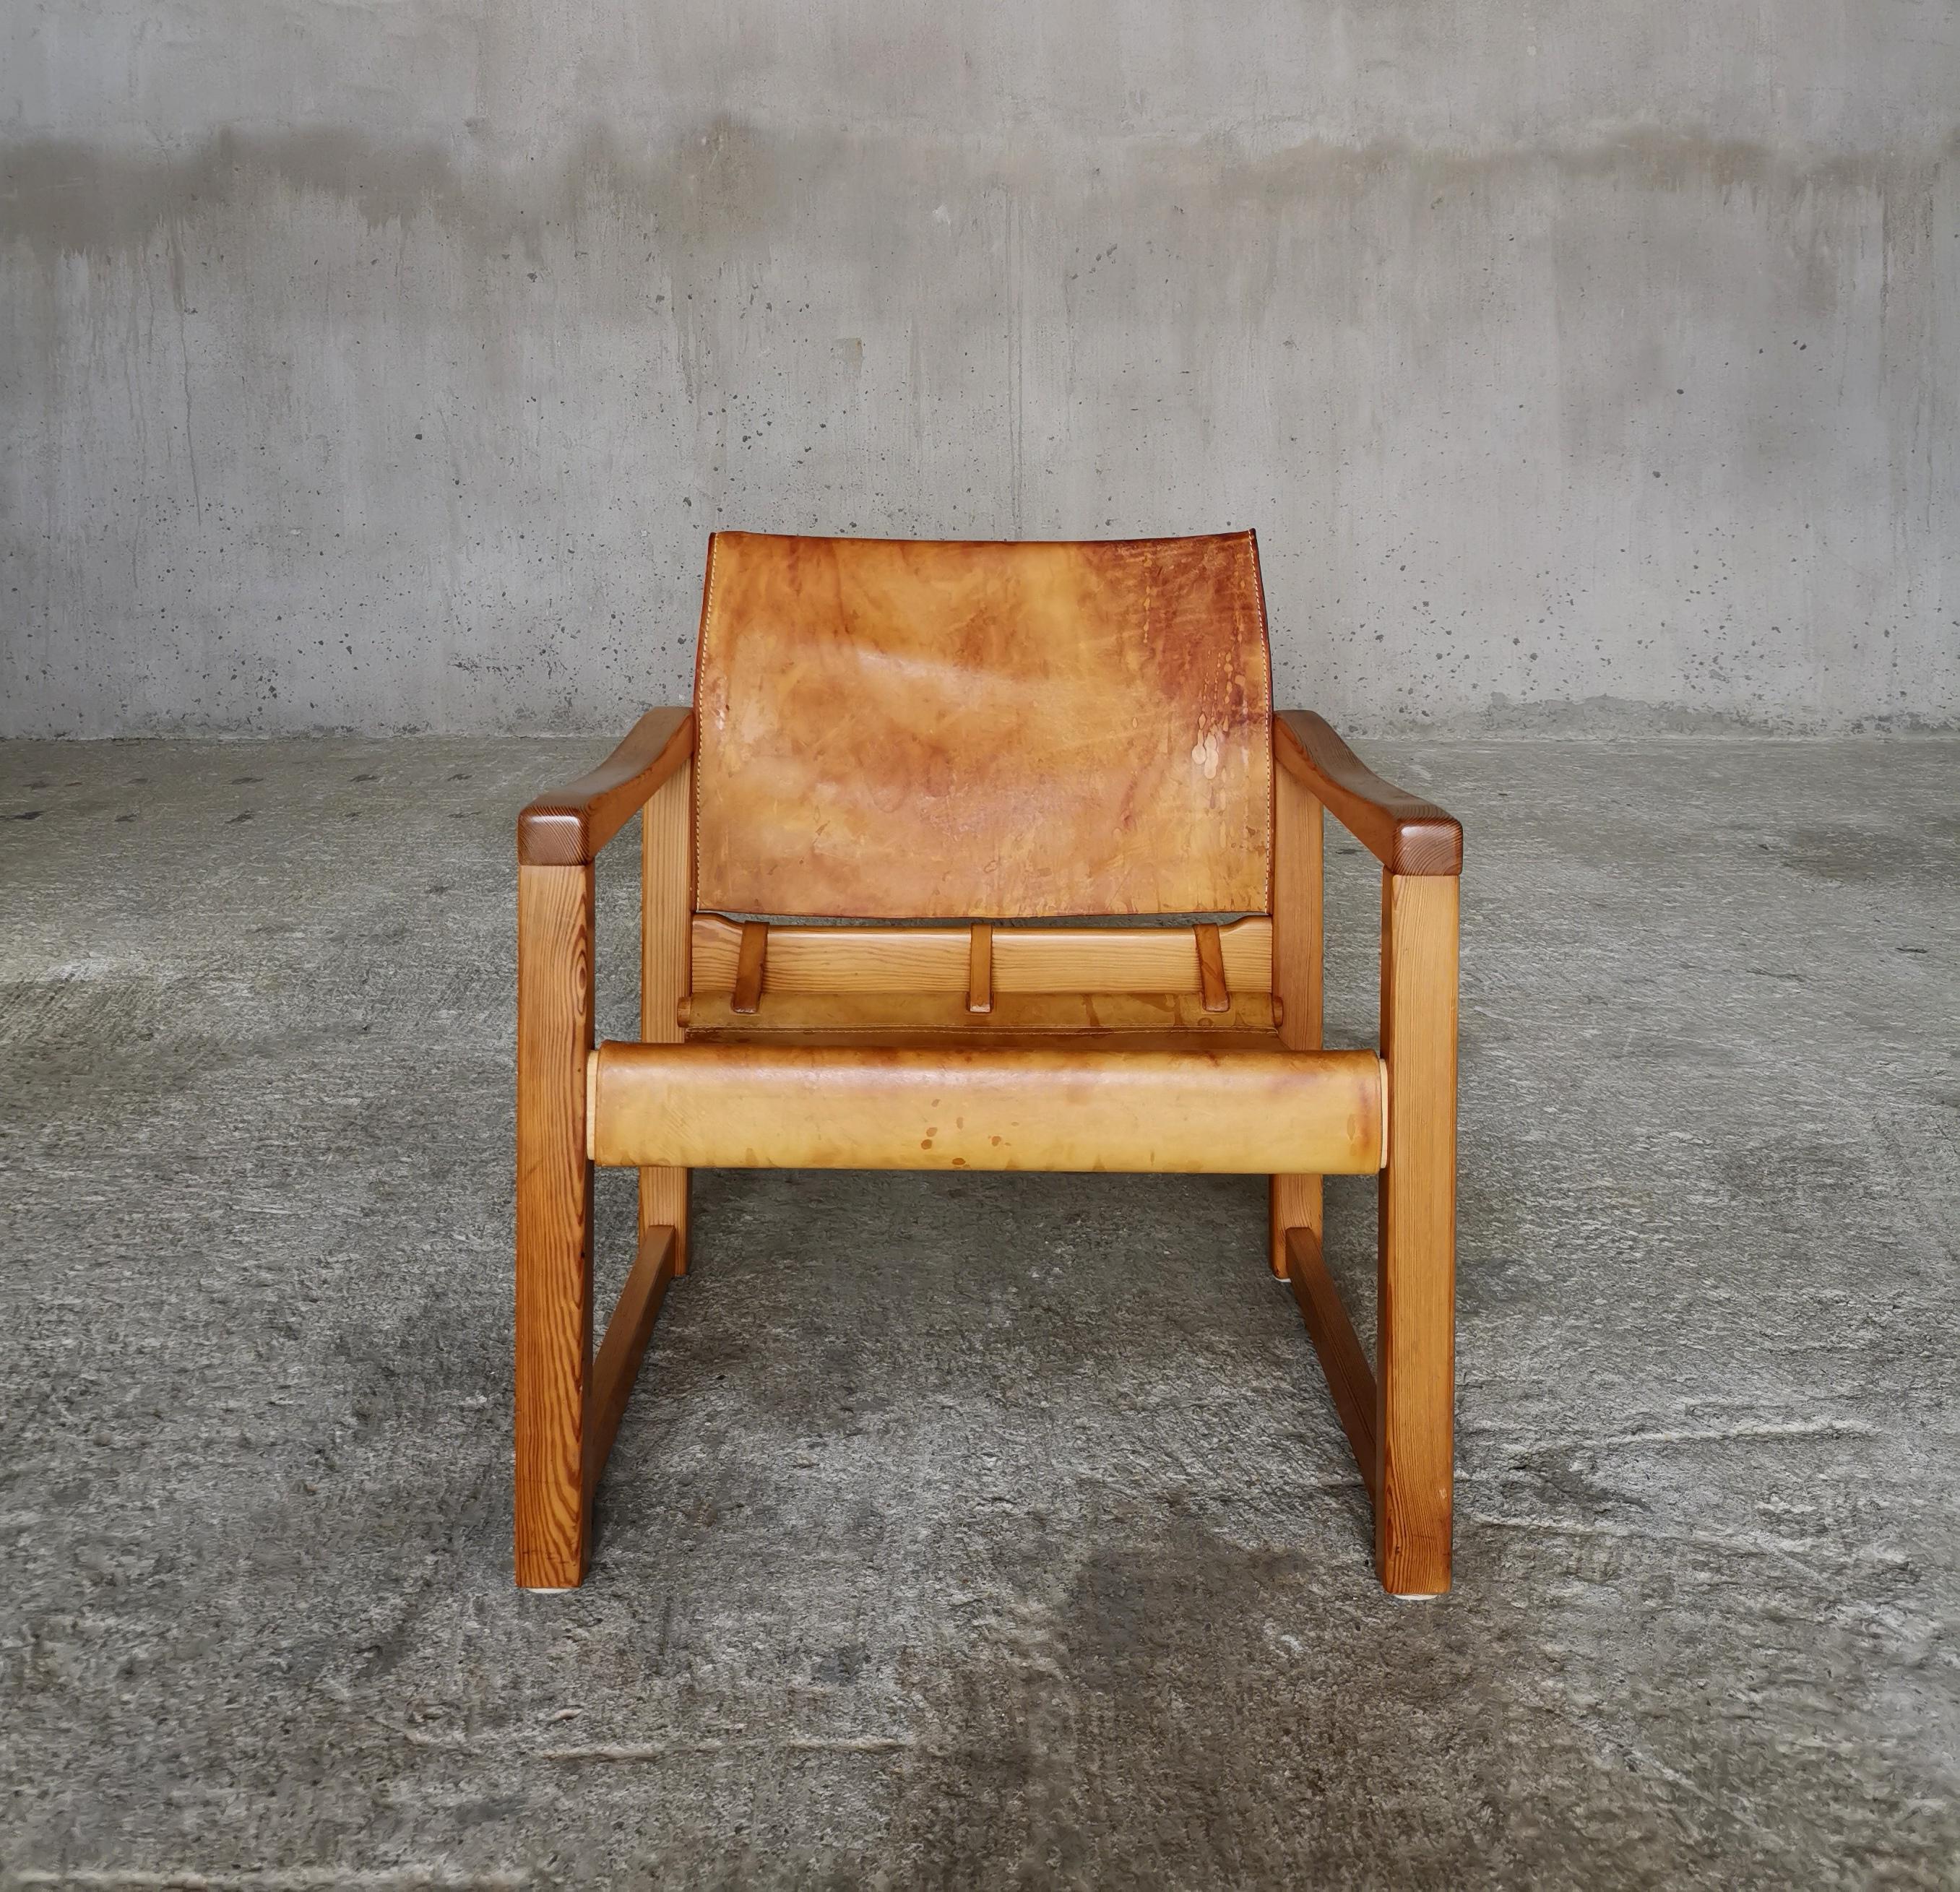 Well kept vintage Diana Armchair by Karin Mobring for Ikea Sweden 1970s.
Glowing patina on both the solid Swedish pine and the thick cognac saddel leather seats. All parts including, seats, straps and stitching on seat and backrest are original and